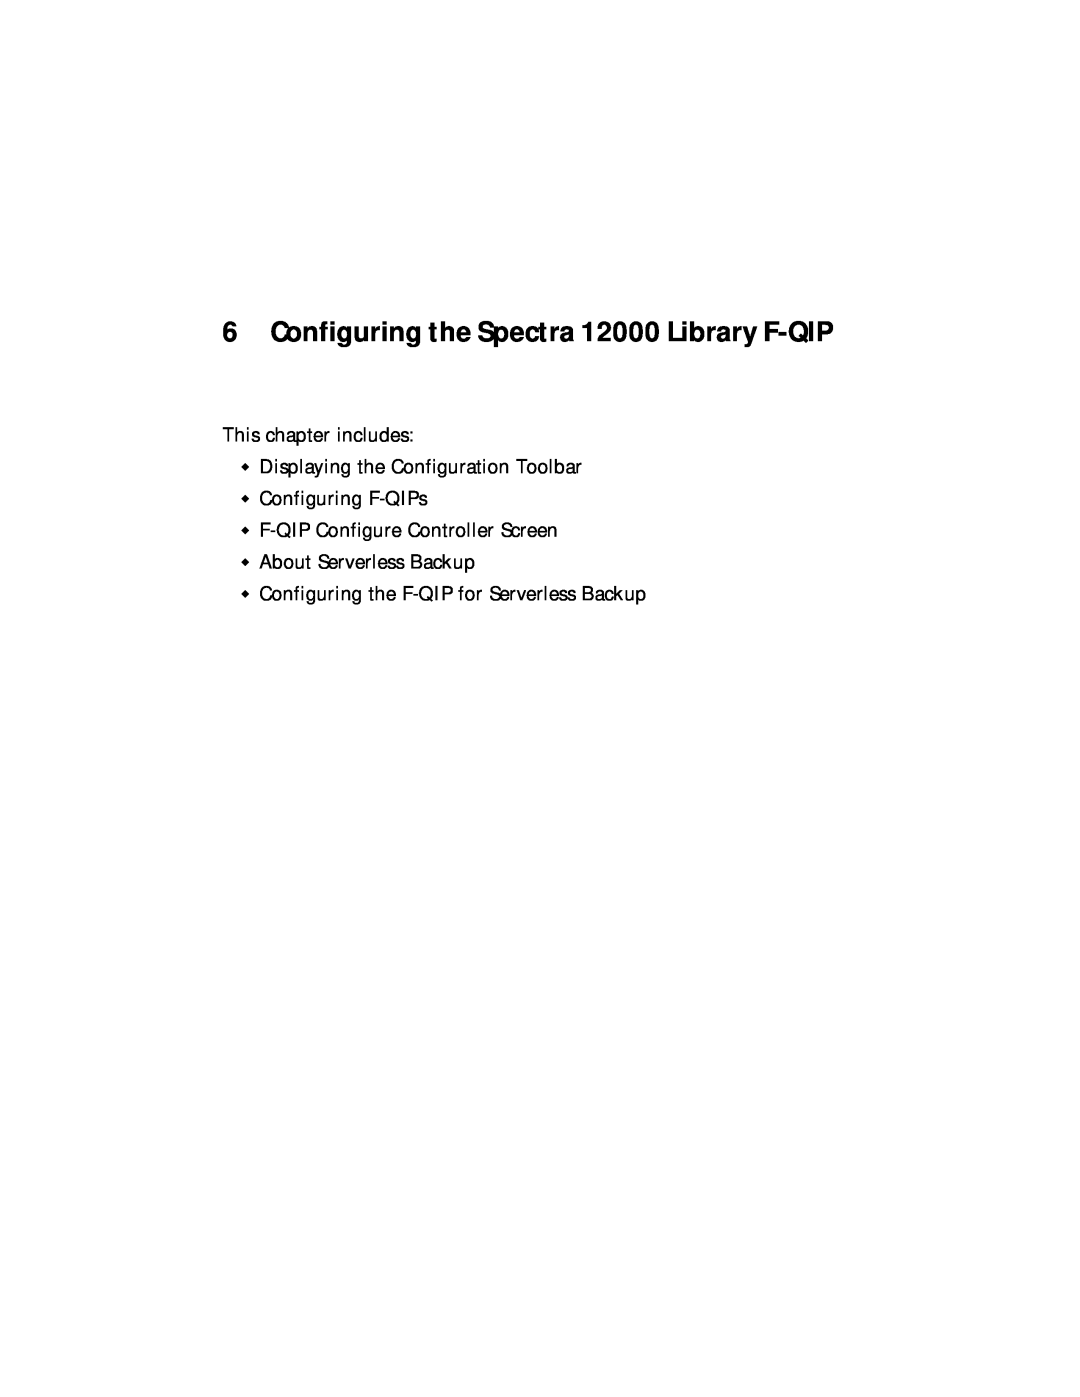 Spectra Logic Configuring the Spectra 12000 Library F-QIP, This chapter includes Displaying the Configuration Toolbar 